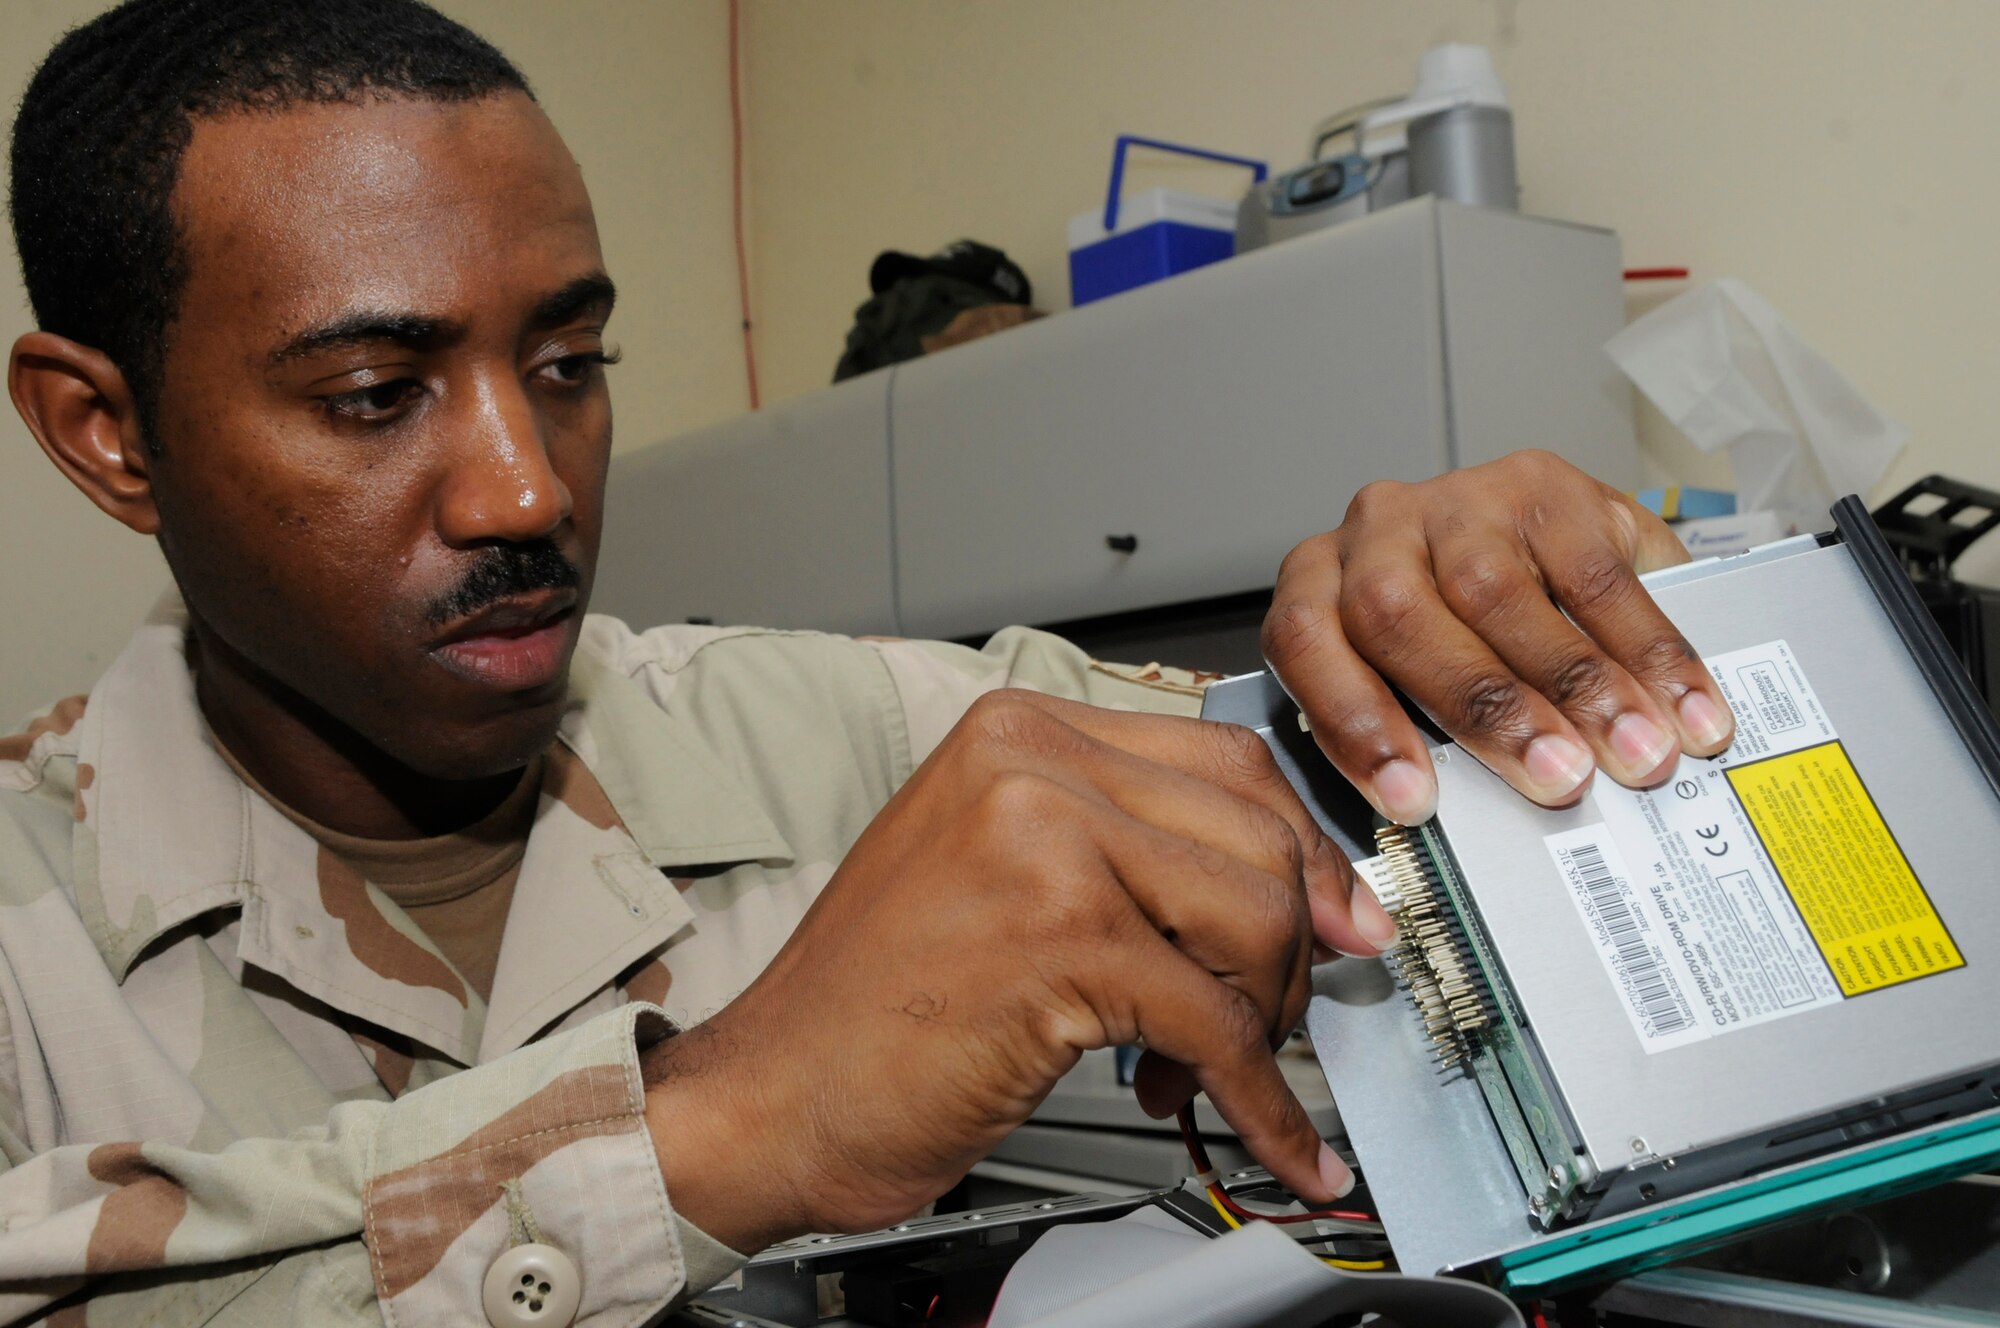 Tech. Sgt. Thomas Gipson, research advisor for the 379th Expeditionary Communications Squadron, installs a new DVD drive to a personal computer so it'll be able to read and record DVD discs Sept. 7, 2008, at an undisclosed location in Southwest Asia. Sergeant Gipson and other resource advisors here approve and purchase communications devices for use in support of Operations Iraqi and Enduring Freedom and Joint Task Force-Horn of Africa. Sergeant Gipson, a native of Waycross, Ga., is deployed from Scott Air Force Base, Ill. (U.S. Air Force photo by Staff Sgt. Darnell T. Cannady/Released)